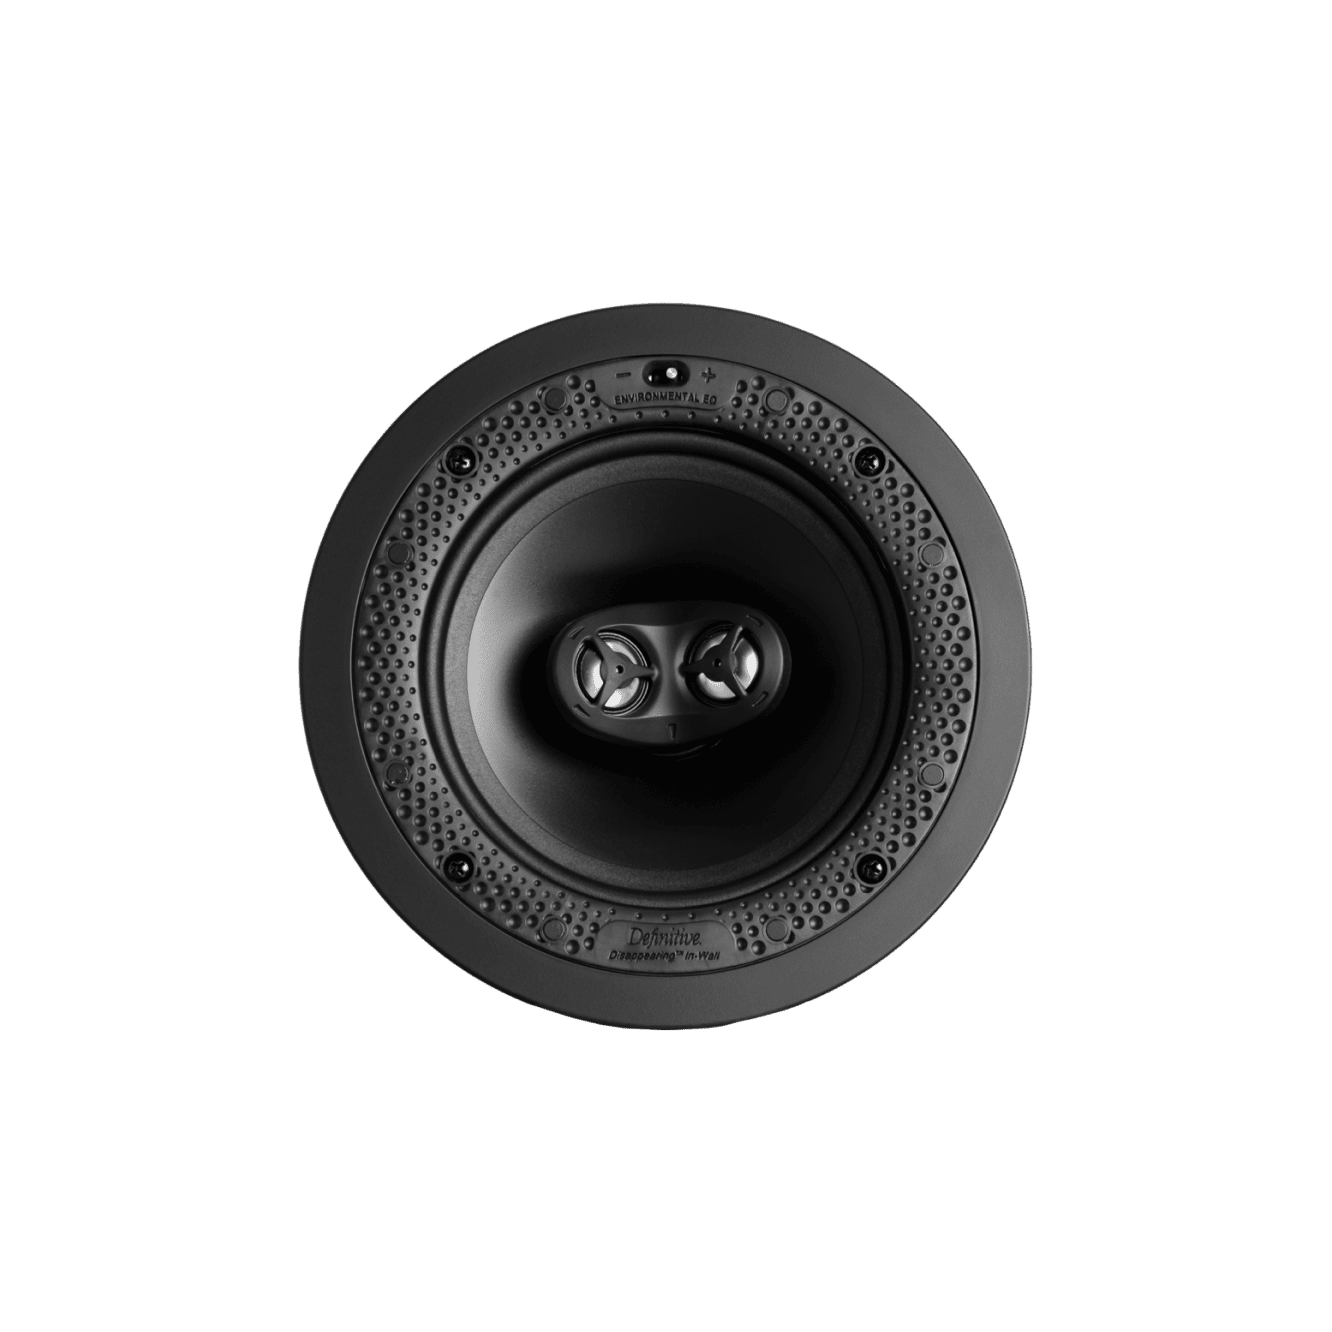 Definitive Technology DI 6.5STR Round STEREO In-Wall/In-Ceiling Speaker